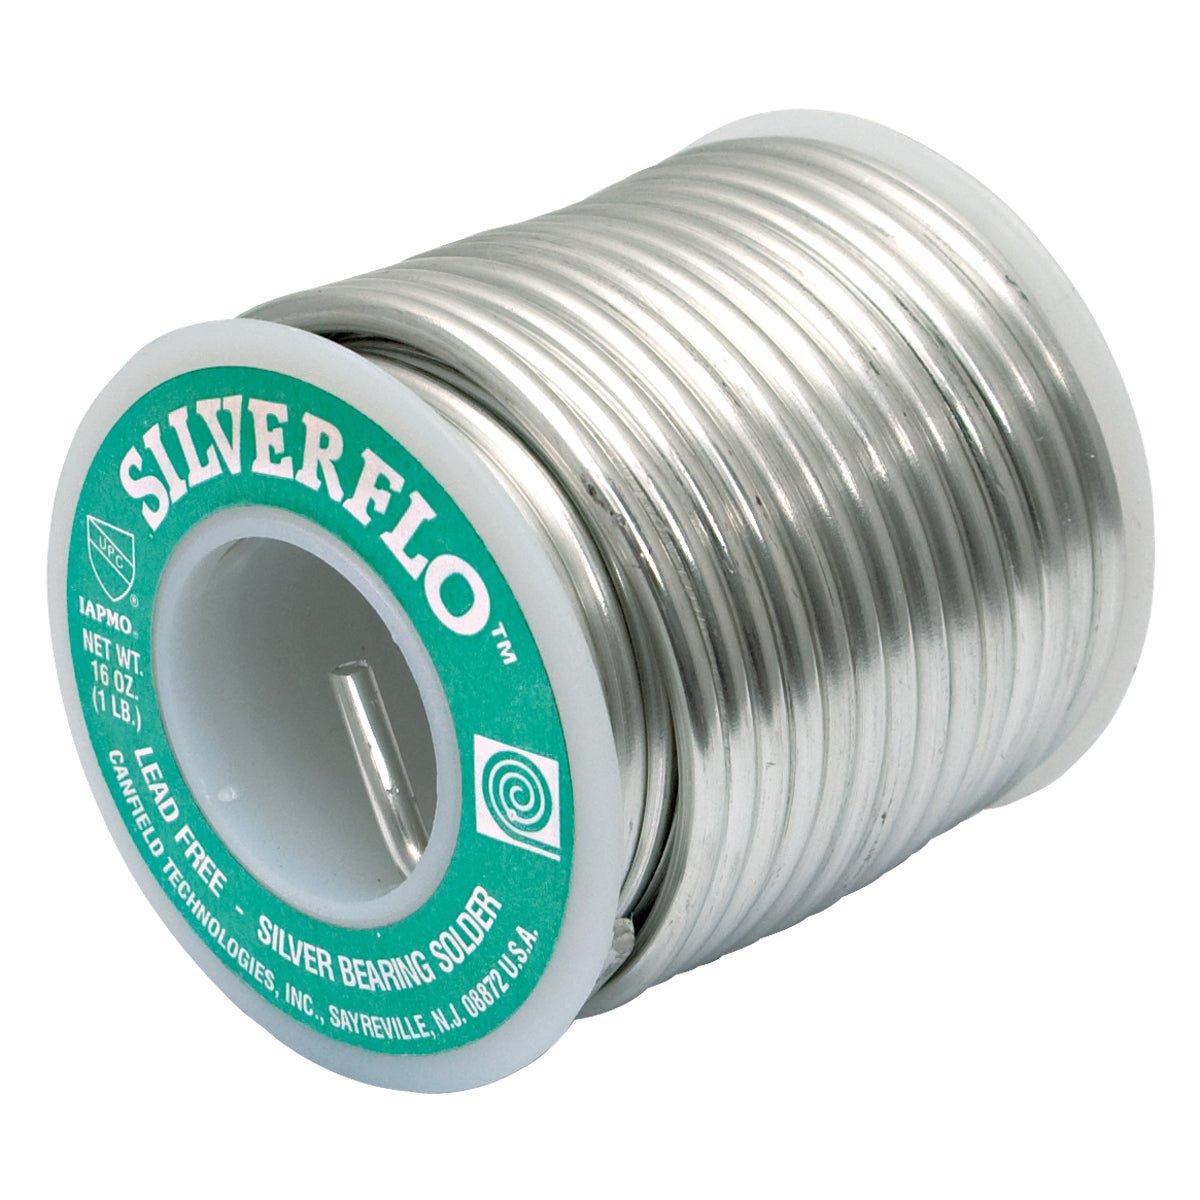 Canfield Silver Flo Lead-Free Solder – 1 Lb.